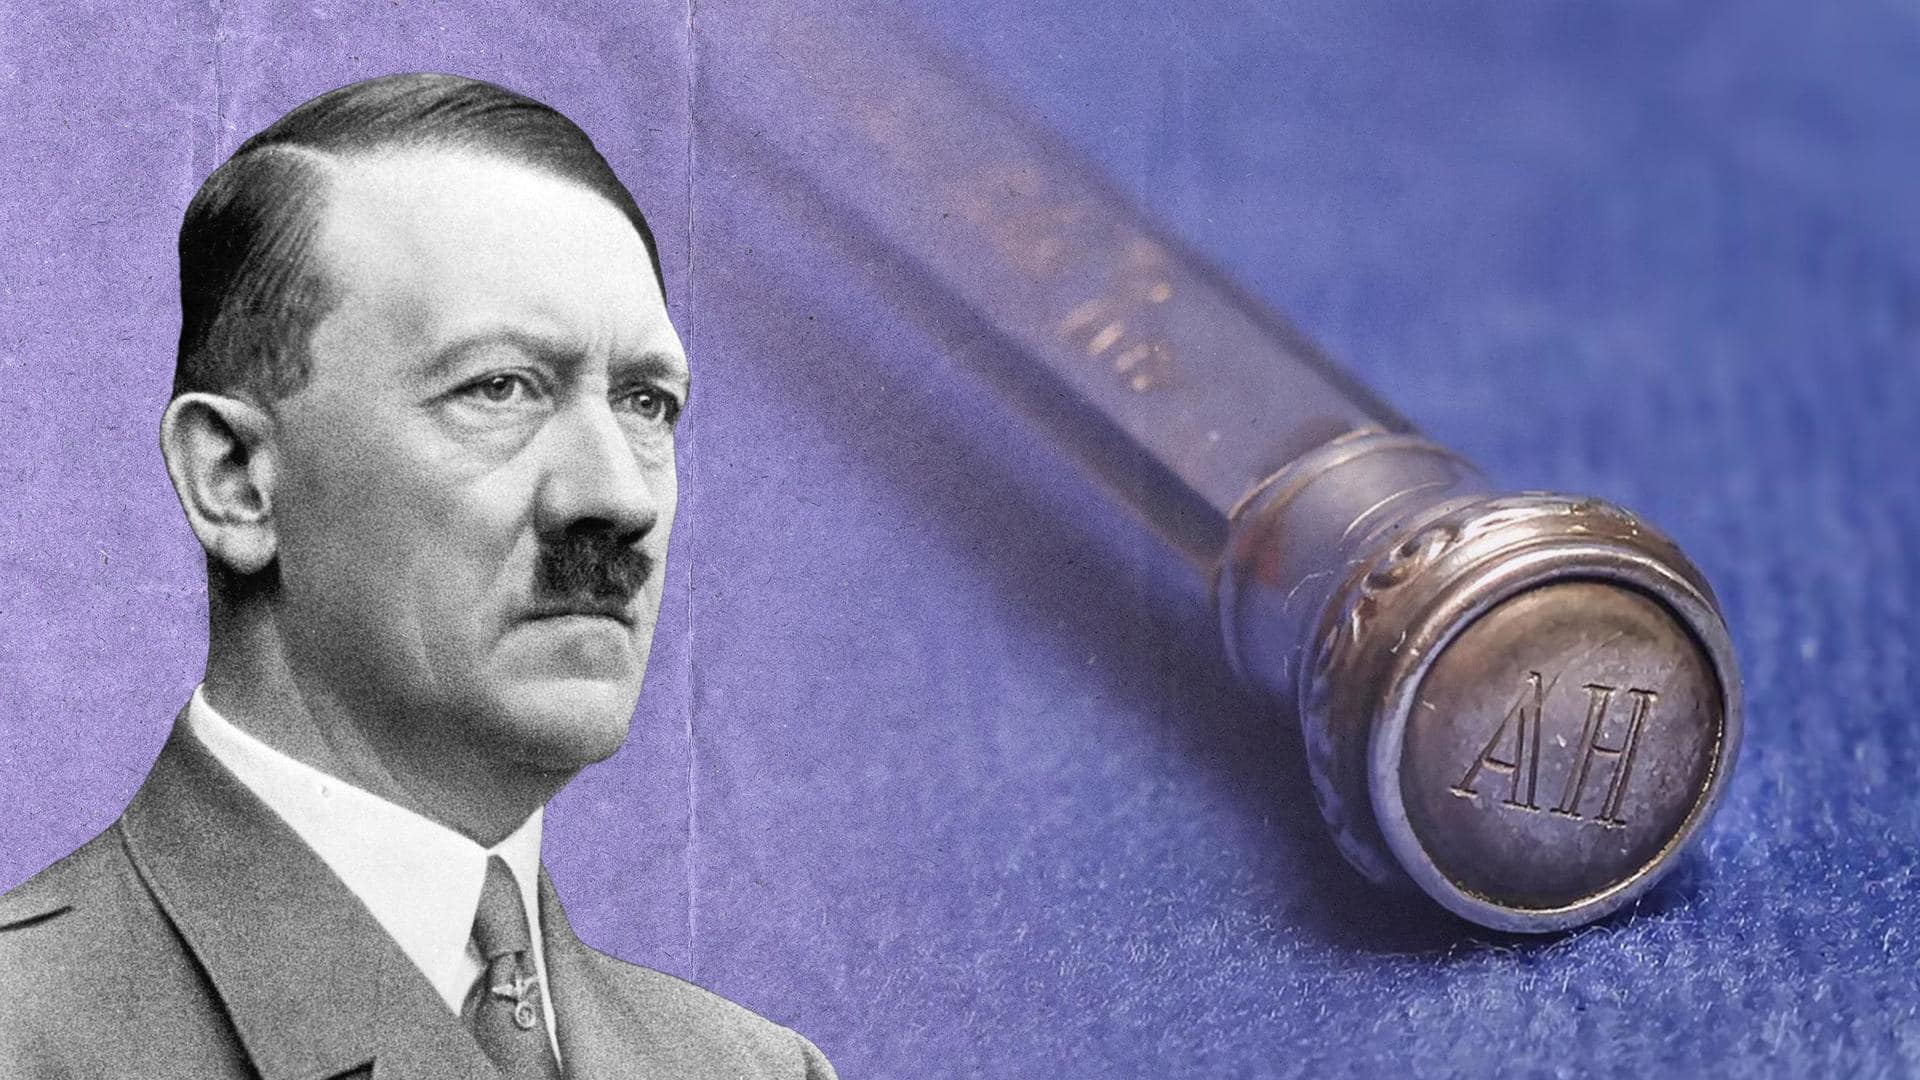 Hitler's pencil gifted by lover on auction from June 6